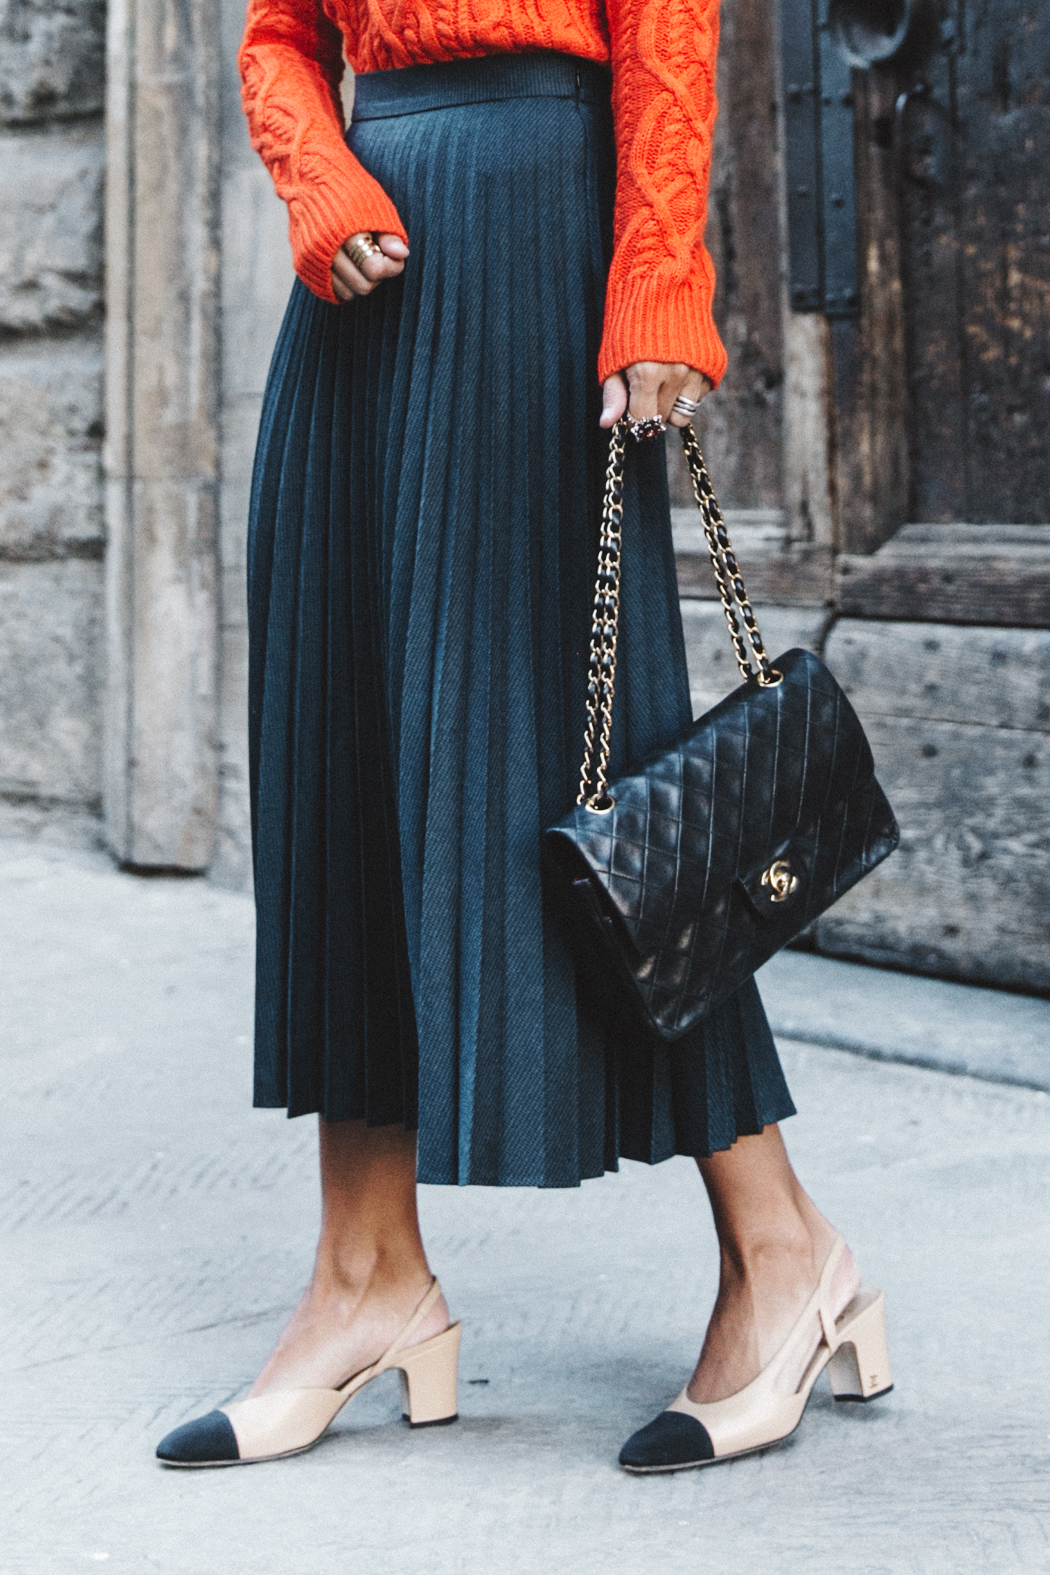 Orange_Sweater-Midi_Skirt-Slingback_Shoes_Chanel-Vintage_Bag-Florence-Outfit-Street_Style-8